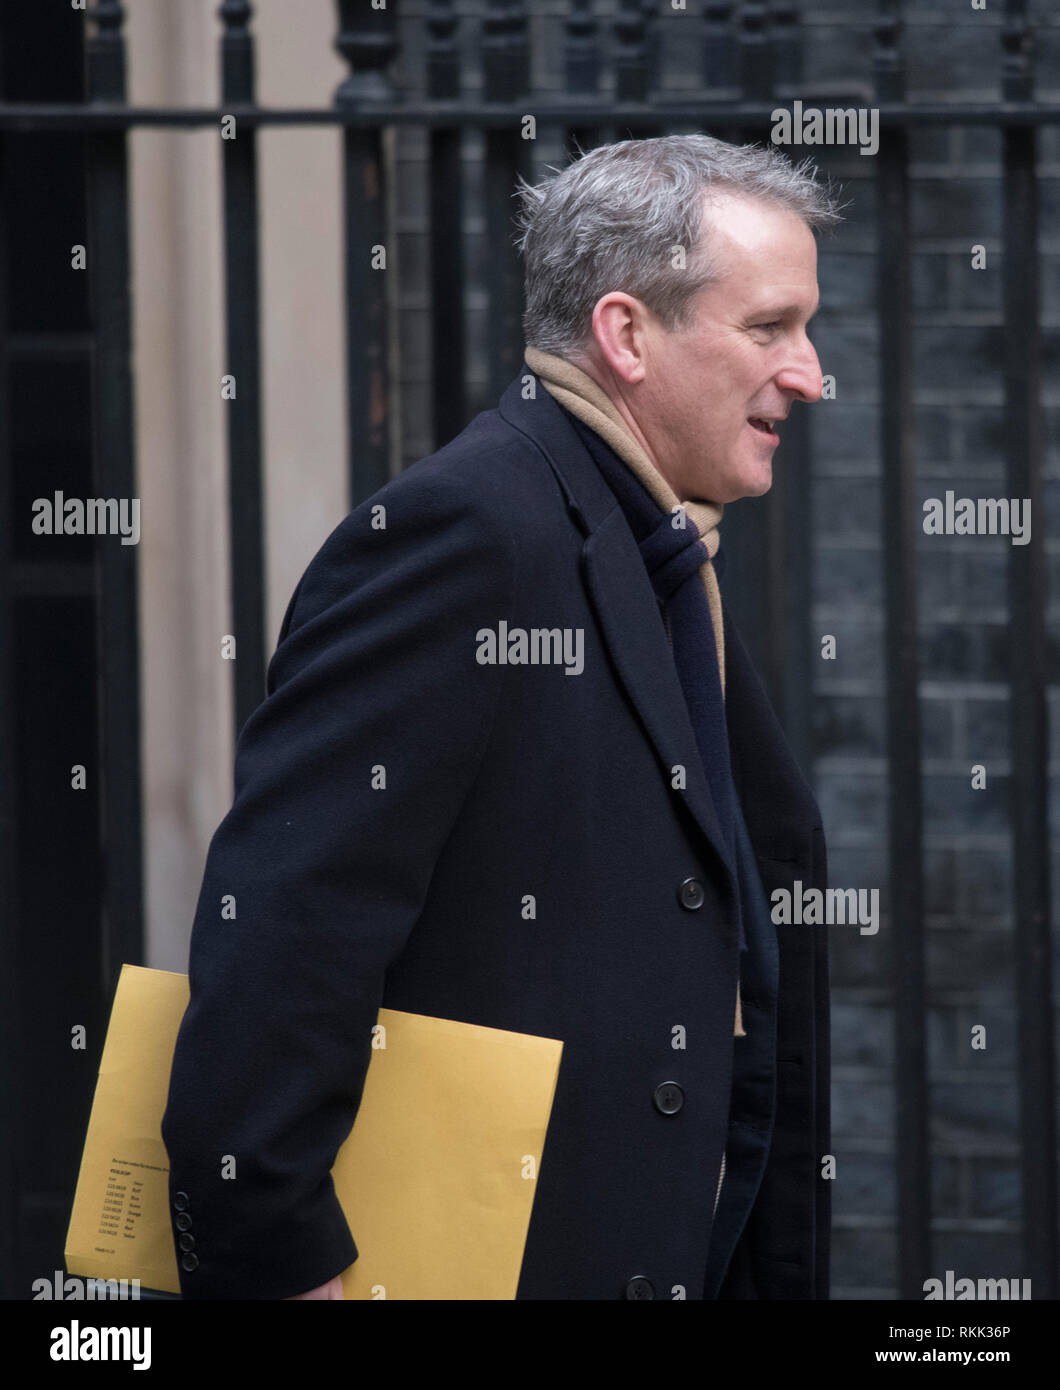 Downing Street, London, UK. 12 February 2019. Government Ministers arrive in Downing Street for weekly cabinet meeting. Damian Hinds, Secretary of State for Education. Credit: Malcolm Park/Alamy Live News. Stock Photo